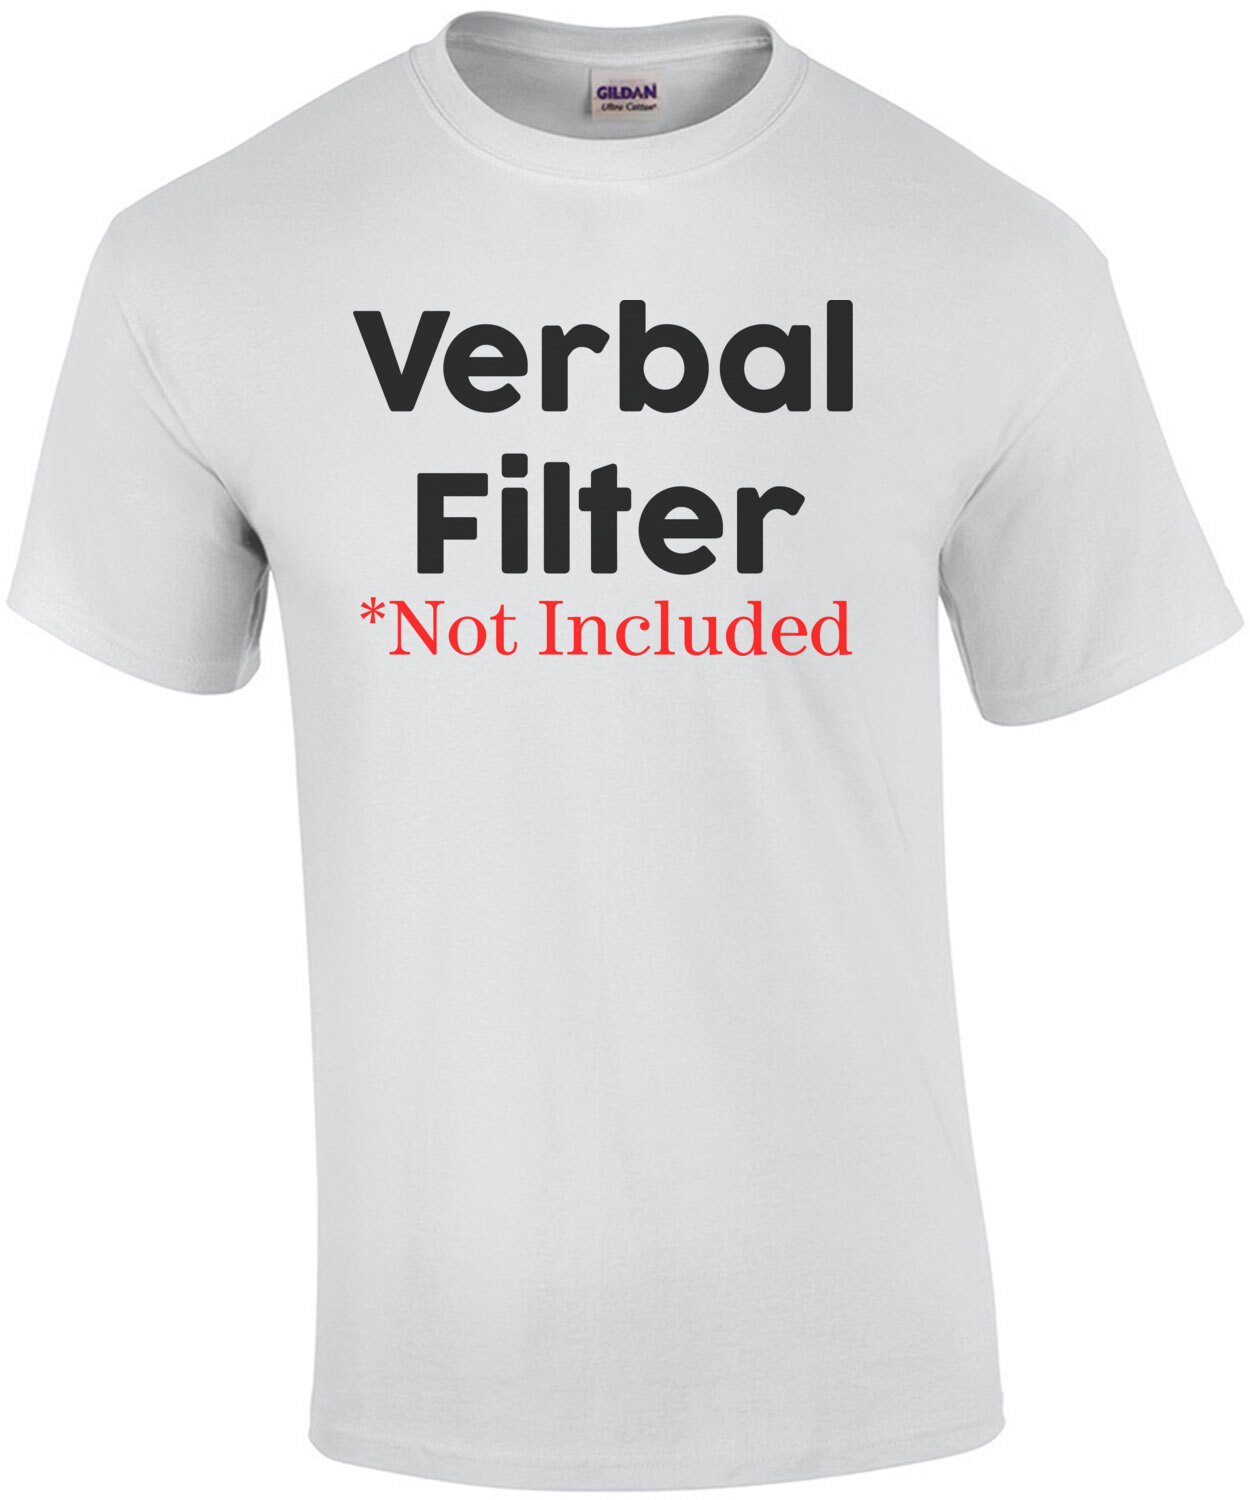 Verbal Filter - Not Included Funny Tee